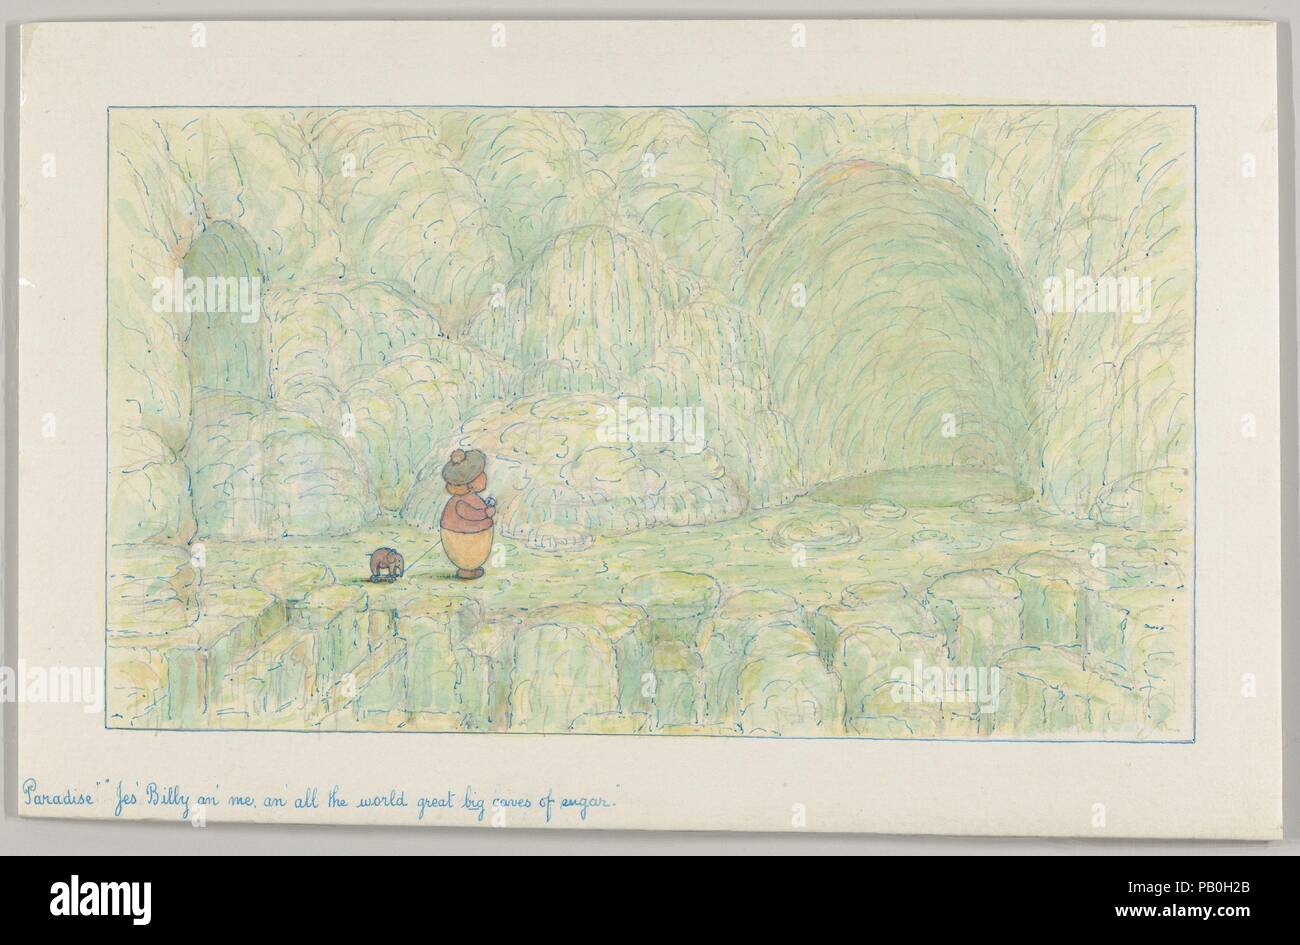 Paradise, Jes' Billy an' me, an all the world great big caves of sugar ('Wiggle Much' Design). Artist: Herbert E. Crowley (British, London 1873-1939 Zurich). Dimensions: sheet: 5 15/16 x 9 7/16 in. (15.1 x 24 cm). Date: ca. 1910. Museum: Metropolitan Museum of Art, New York, USA. Stock Photo